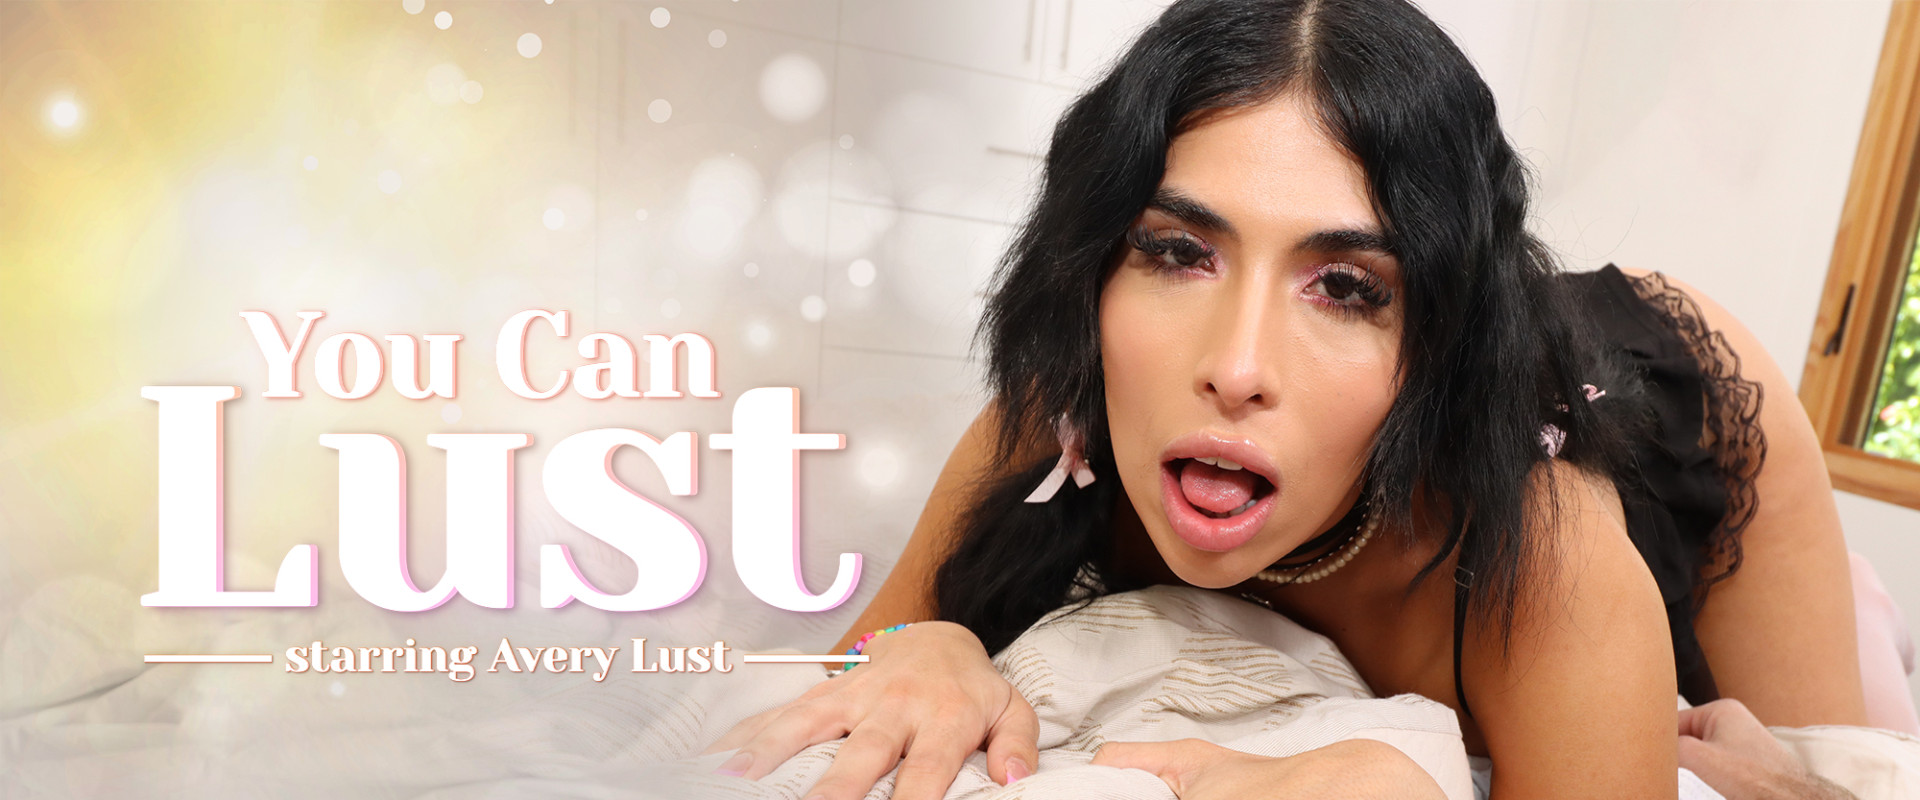 You Can Lust!